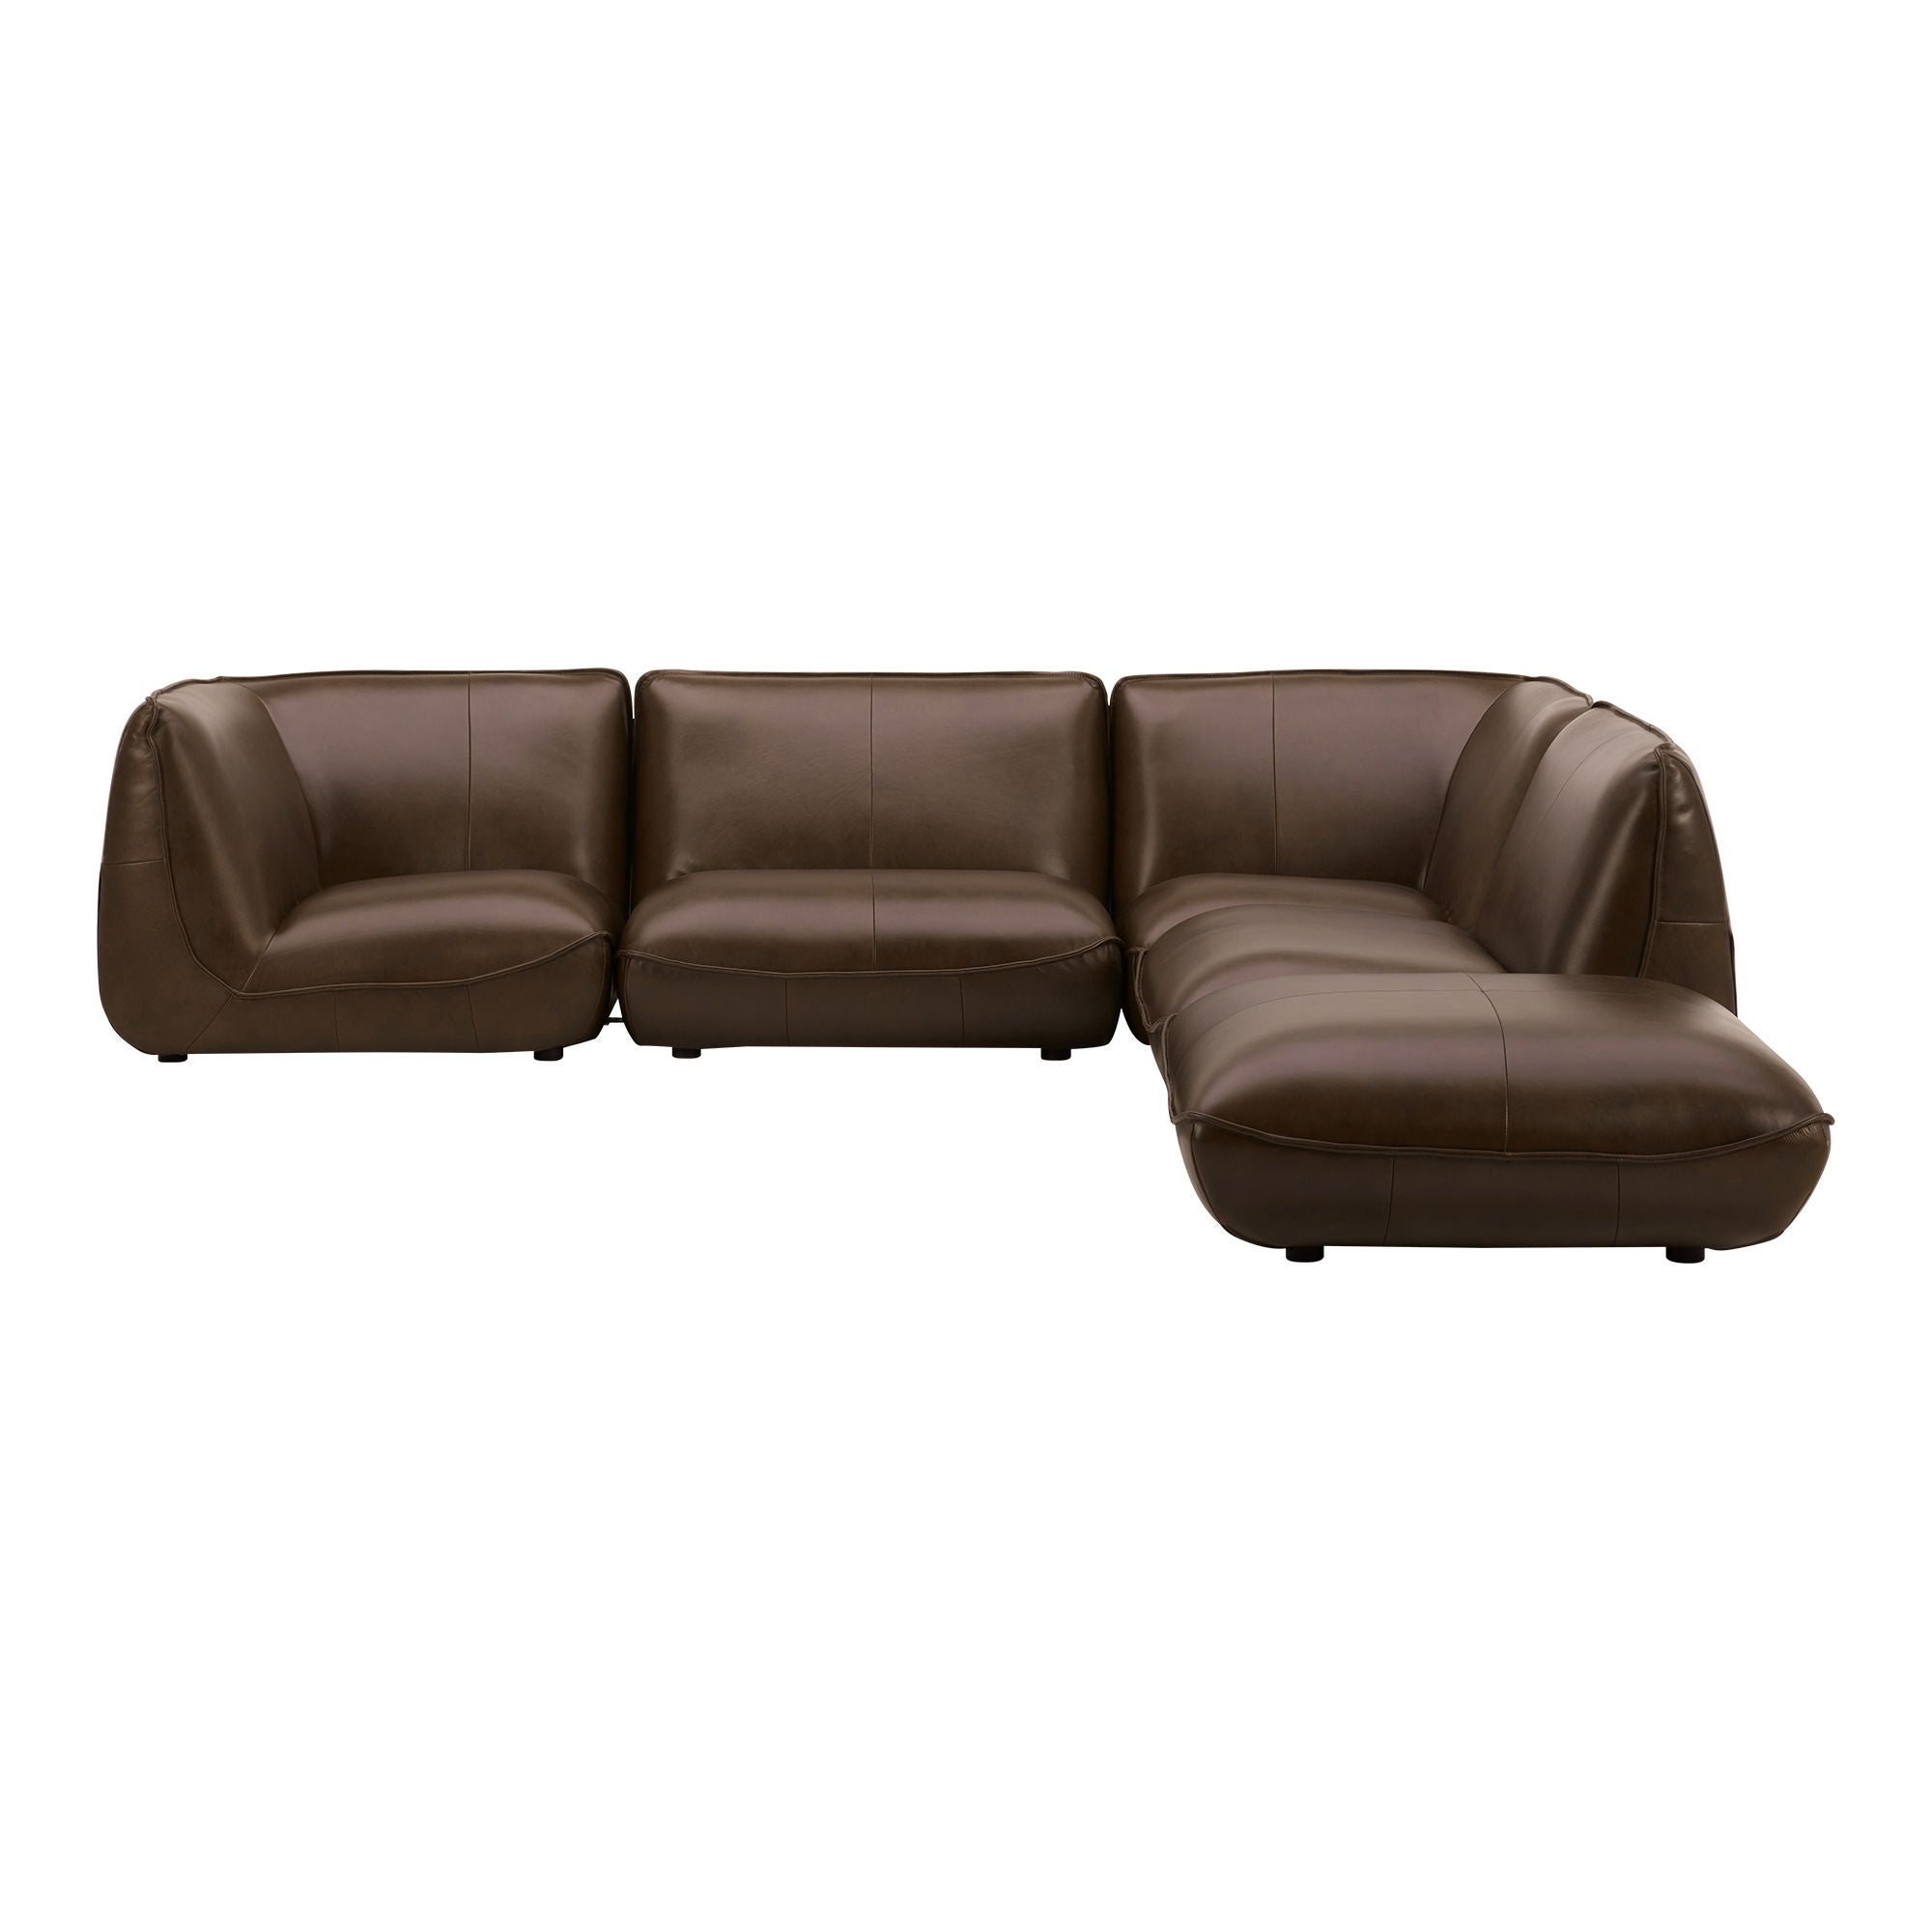 Brown Leather Modular Sectional - Zeppelin Dream, Comfy